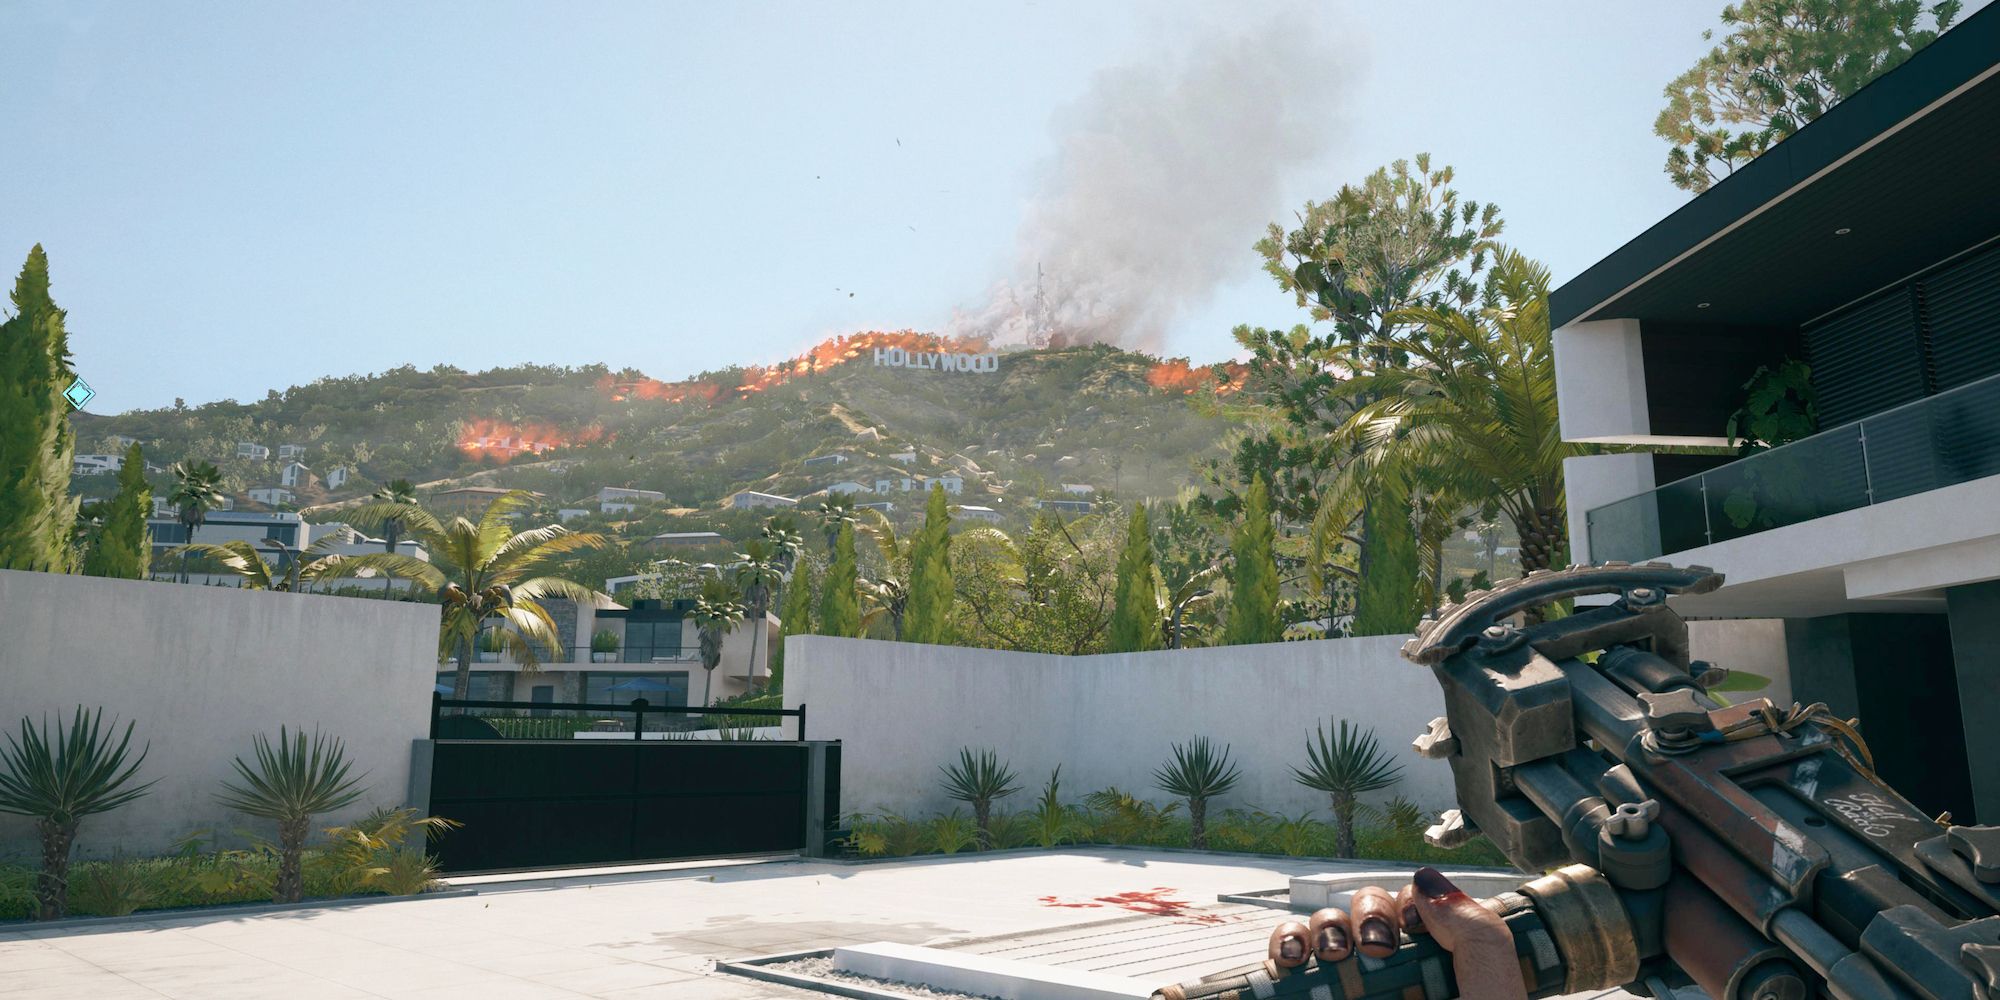 A view of the burning Hollywood sign in Dead Island 2.